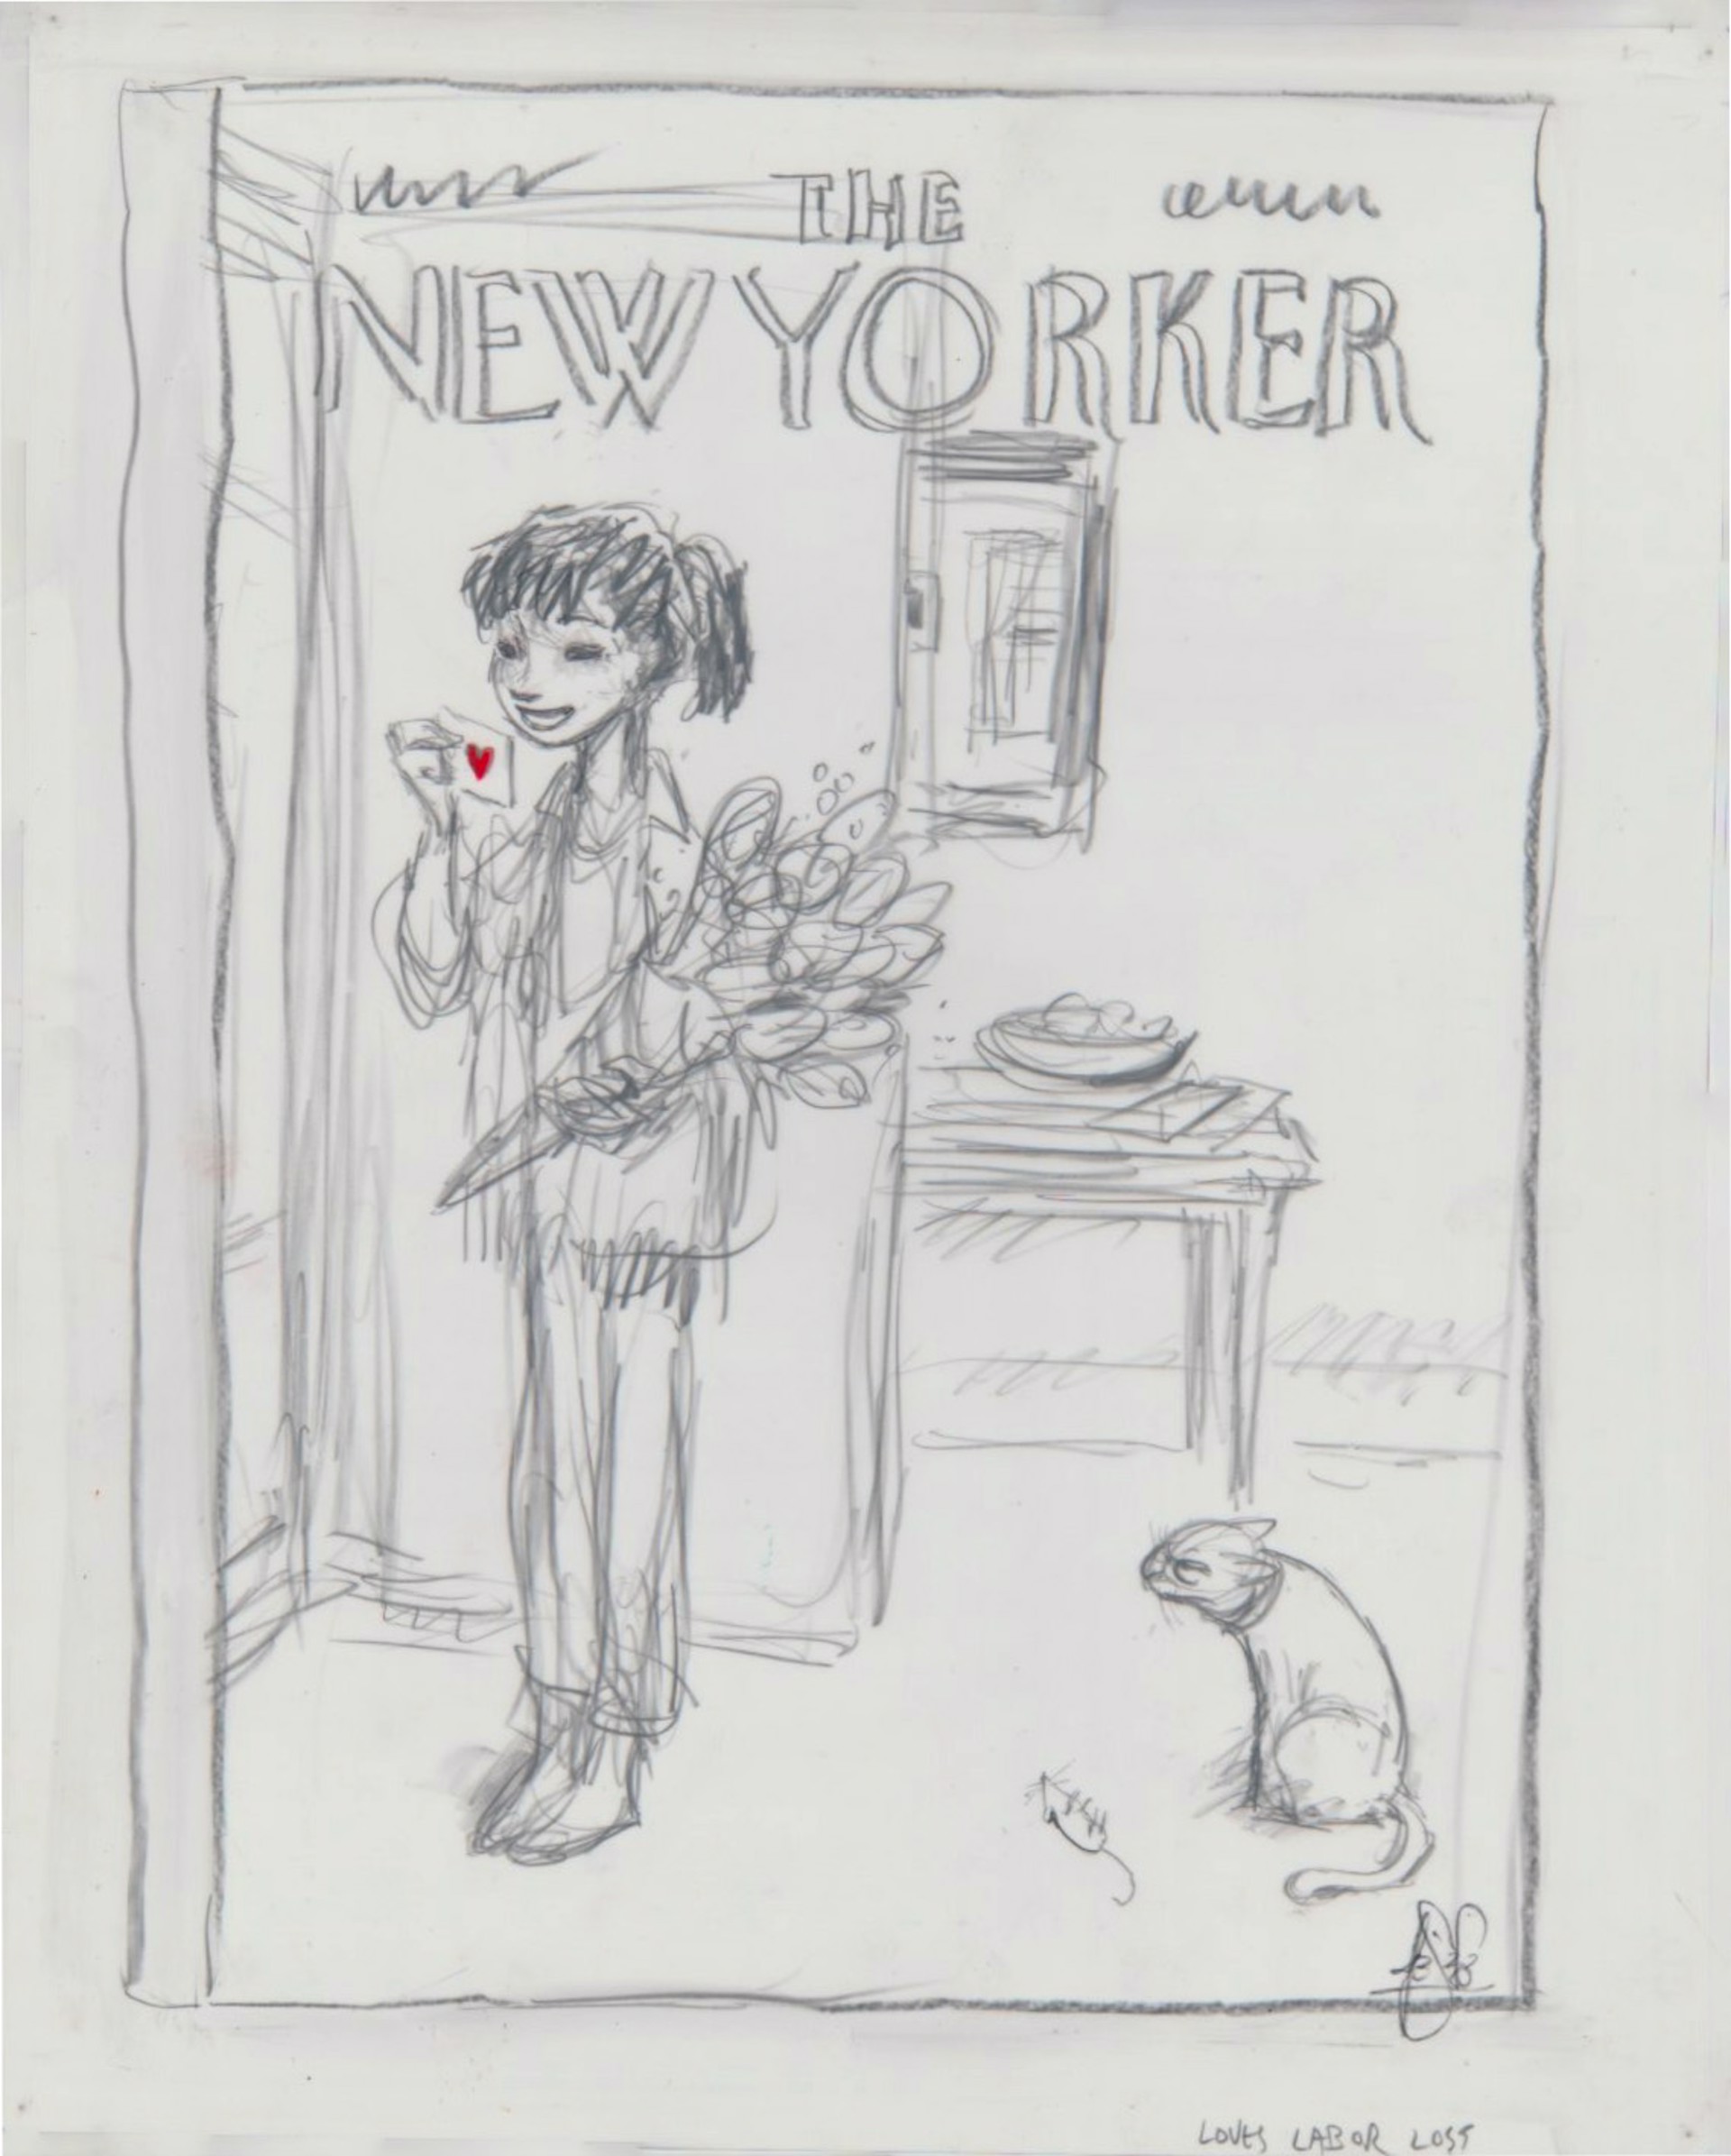 Proposed sketch for New Yorker cover "Loves Labor Lost" by Peter de Sève